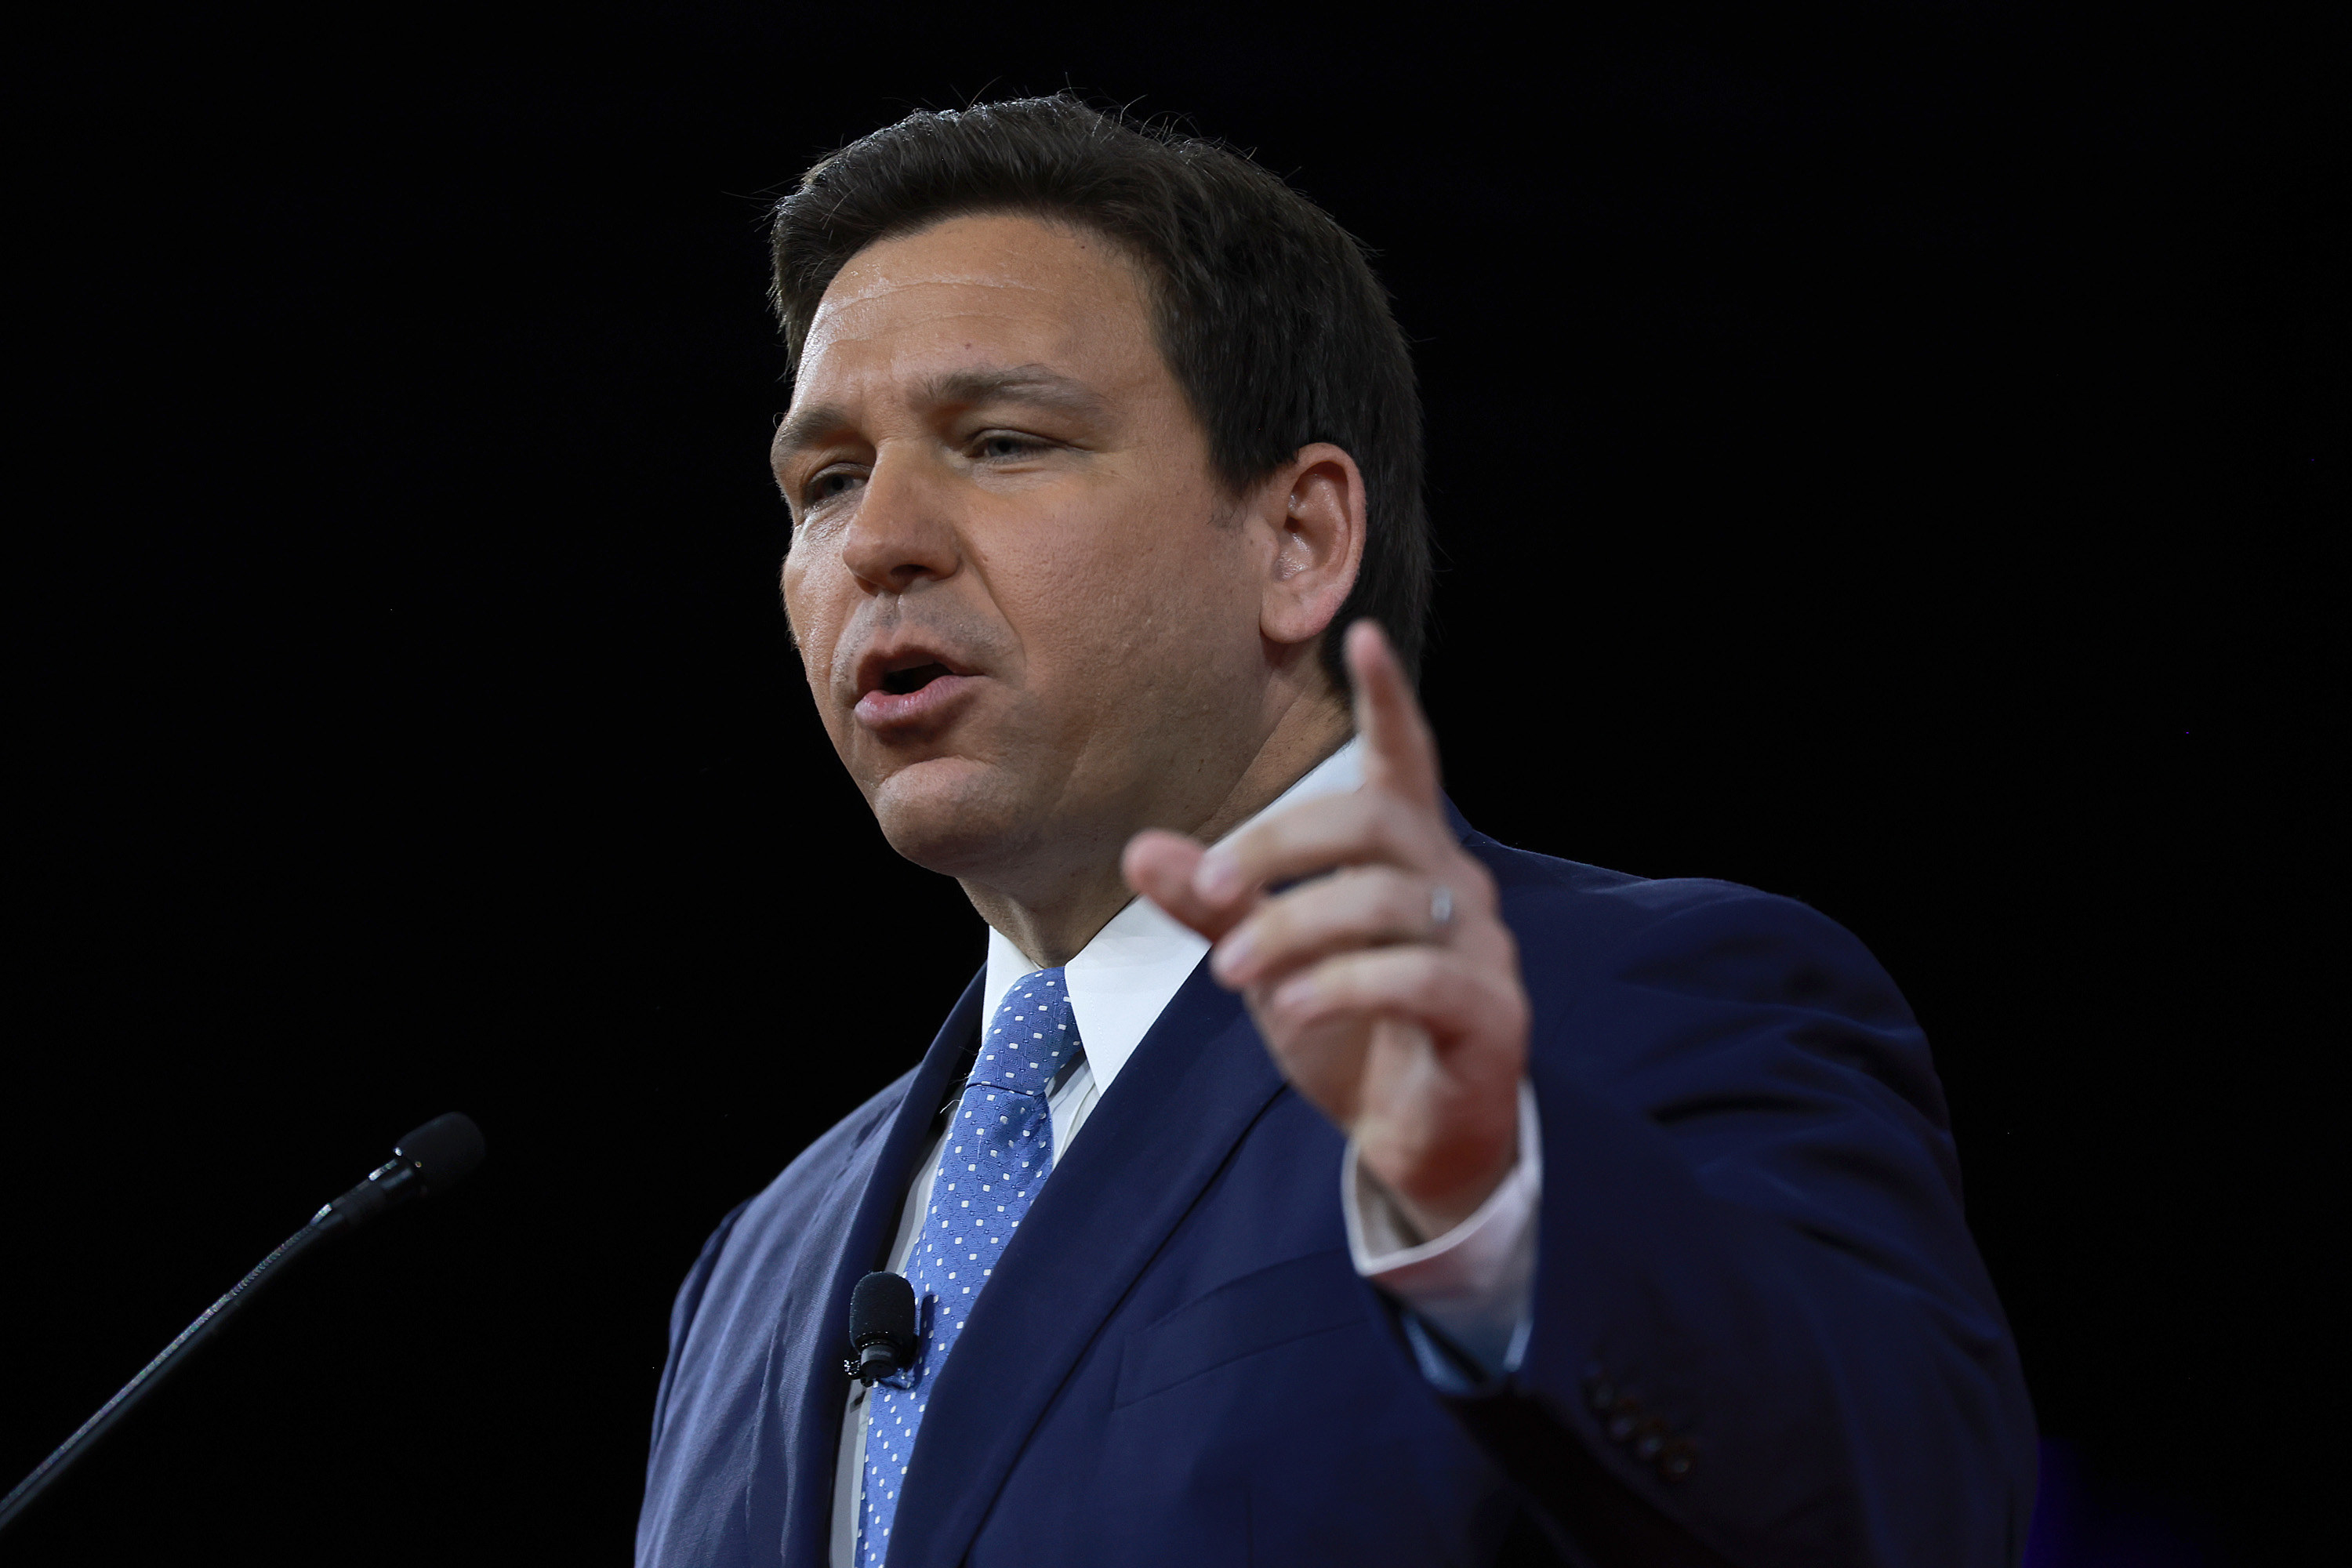 Governor Ron DeSantis speaks in front of a microphone